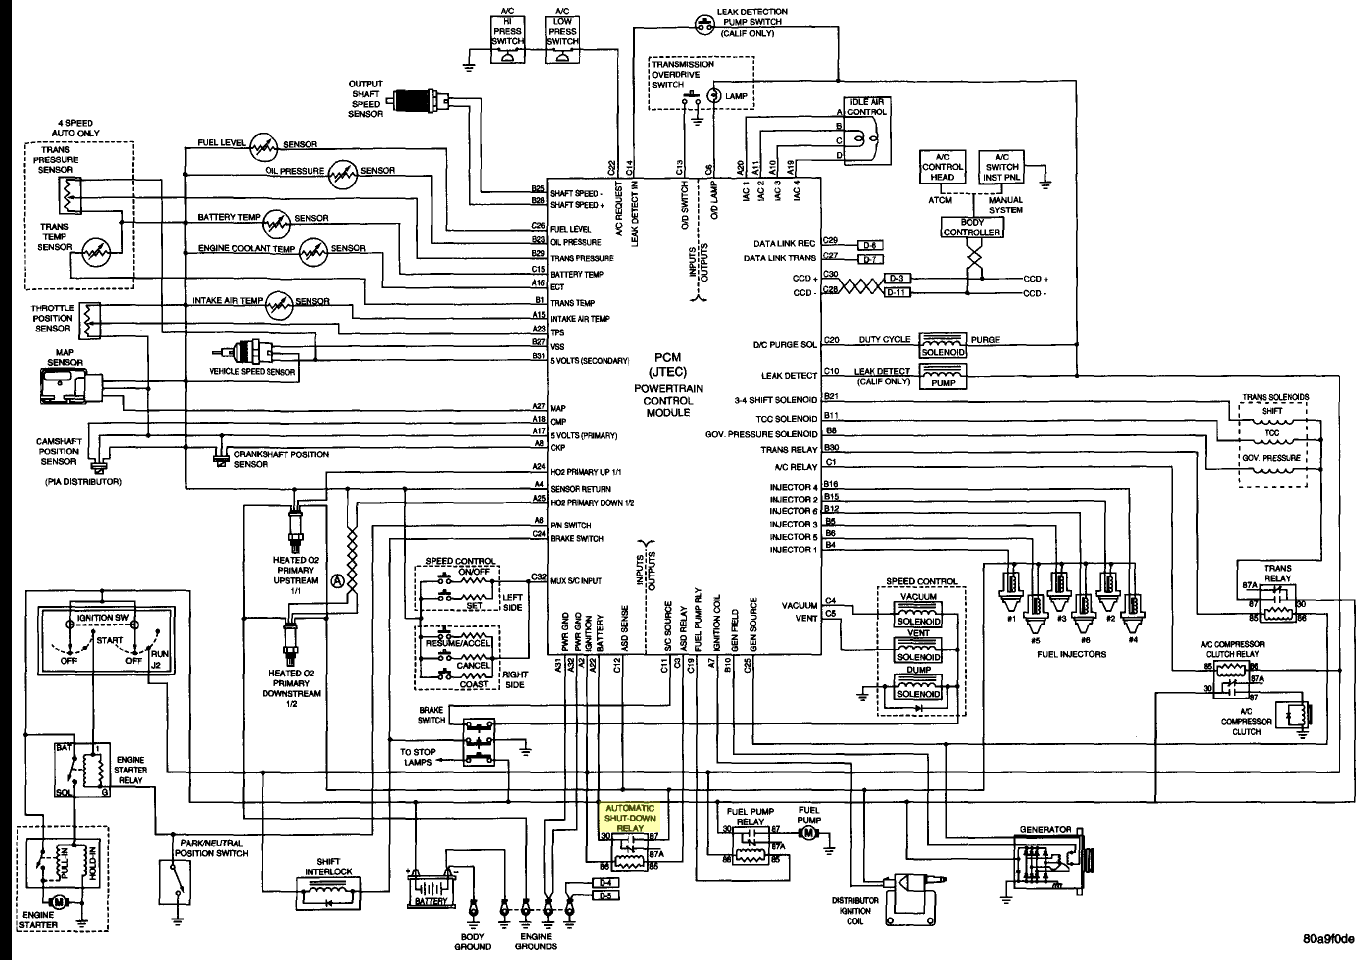 4 Speed Blower Motor Wiring Diagram from wiringall.com